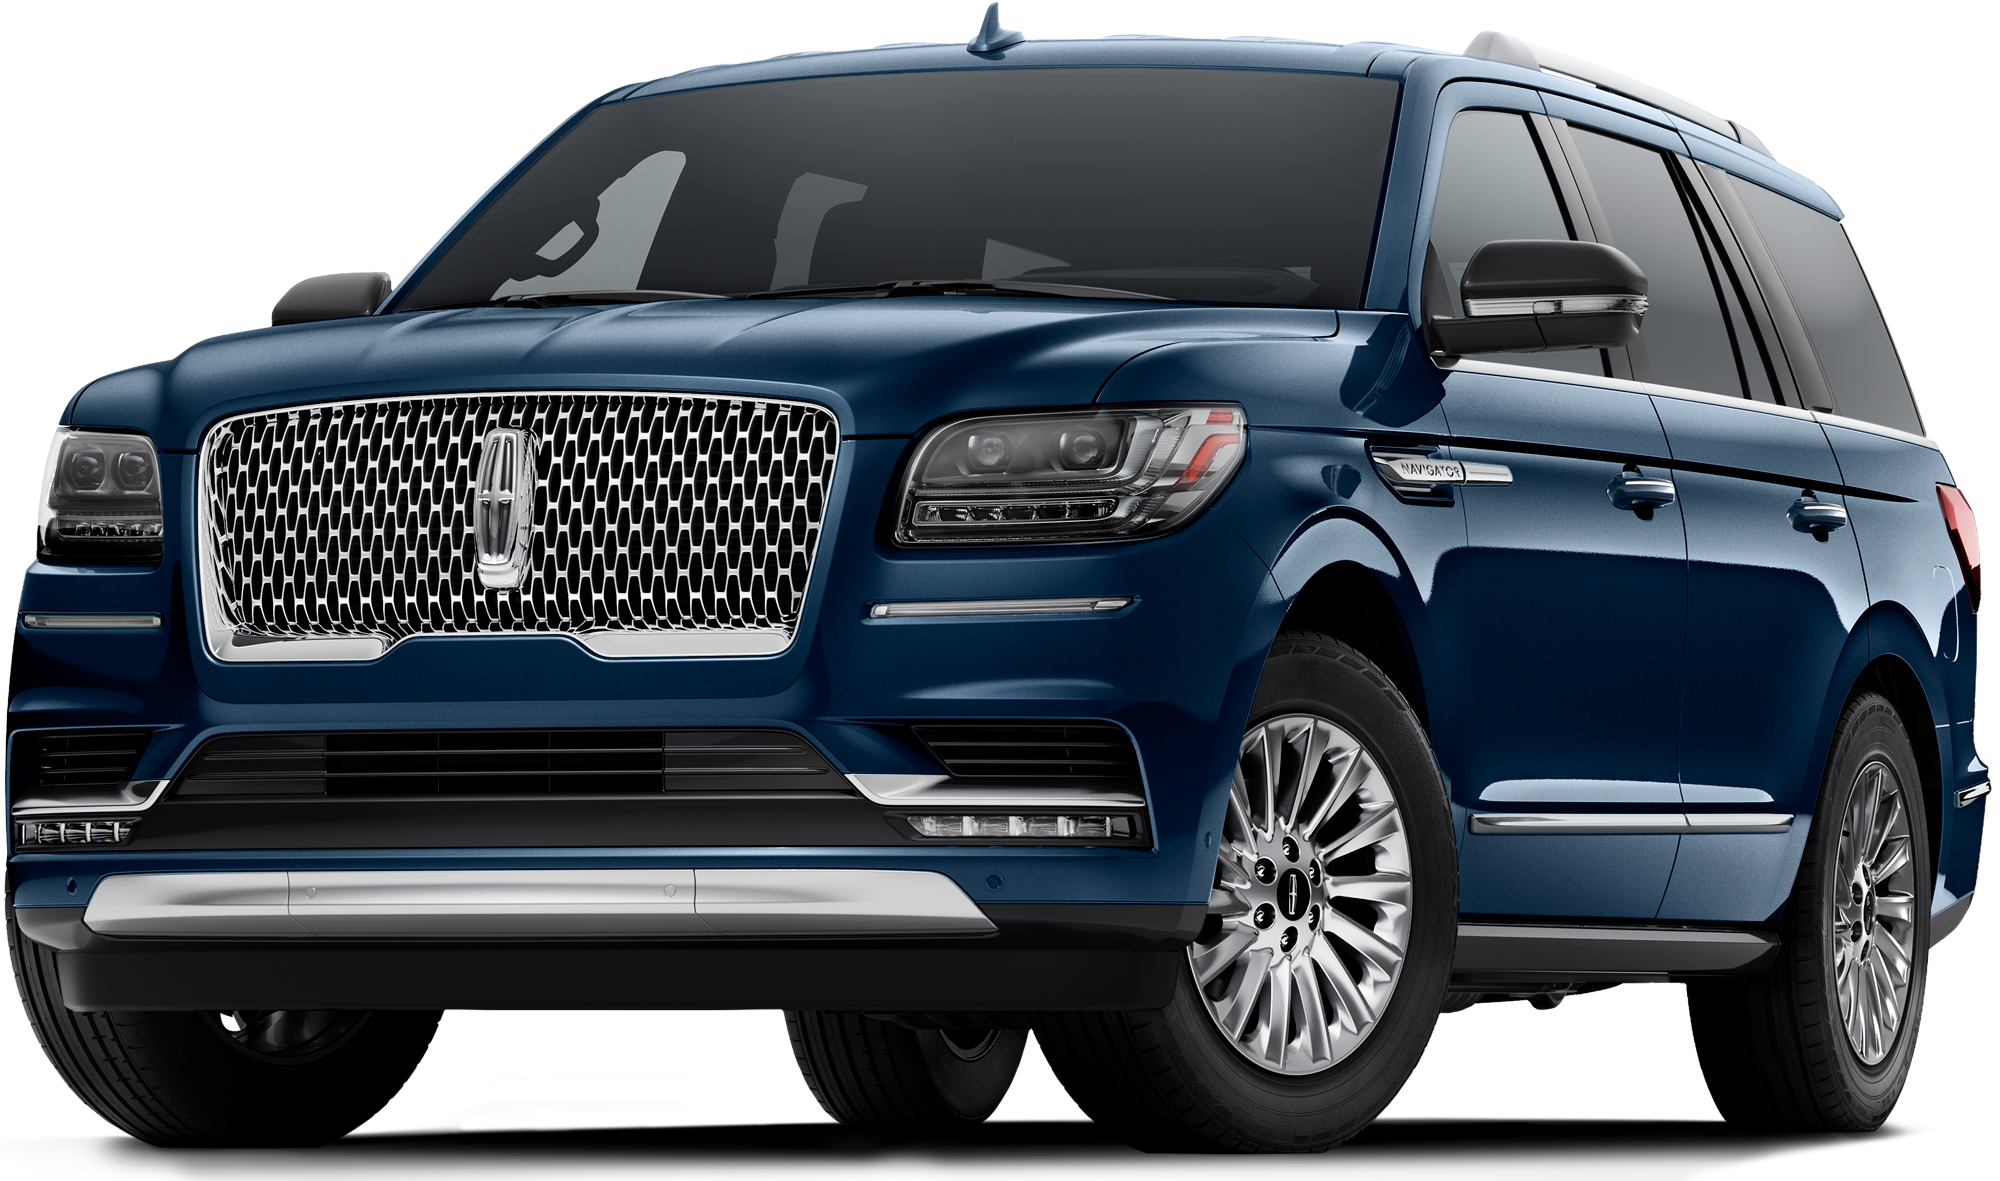 2021-lincoln-navigator-incentives-specials-offers-in-baton-rouge-la